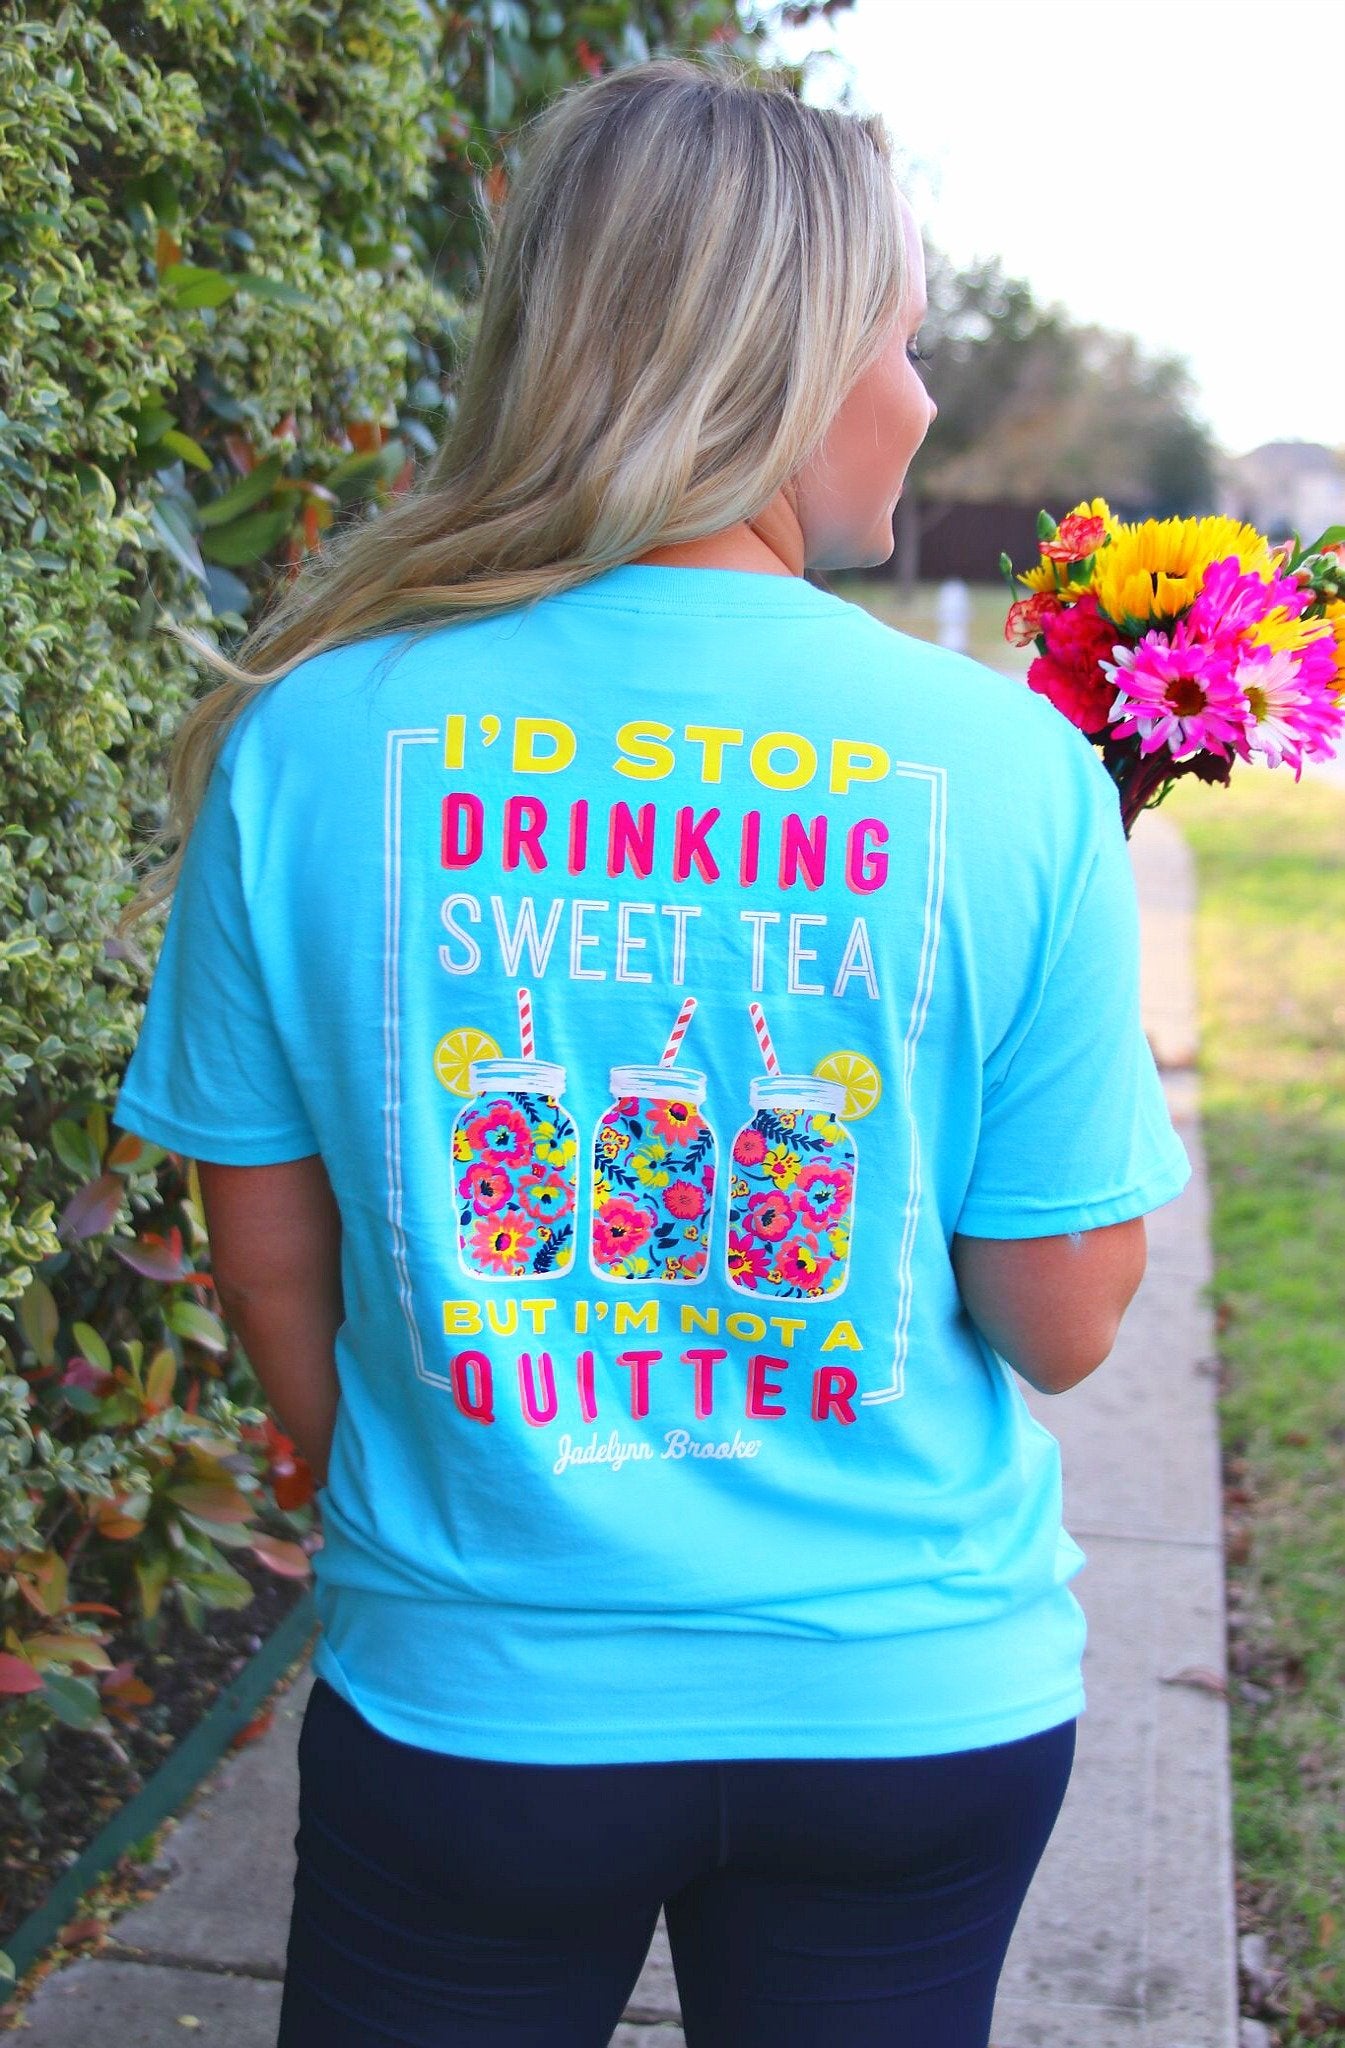 Last Chance Size XS | I'd Stop Drinking Sweet Tea Short Sleeve Tee Shirt in Turquoise - Giddy Up Glamour Boutique